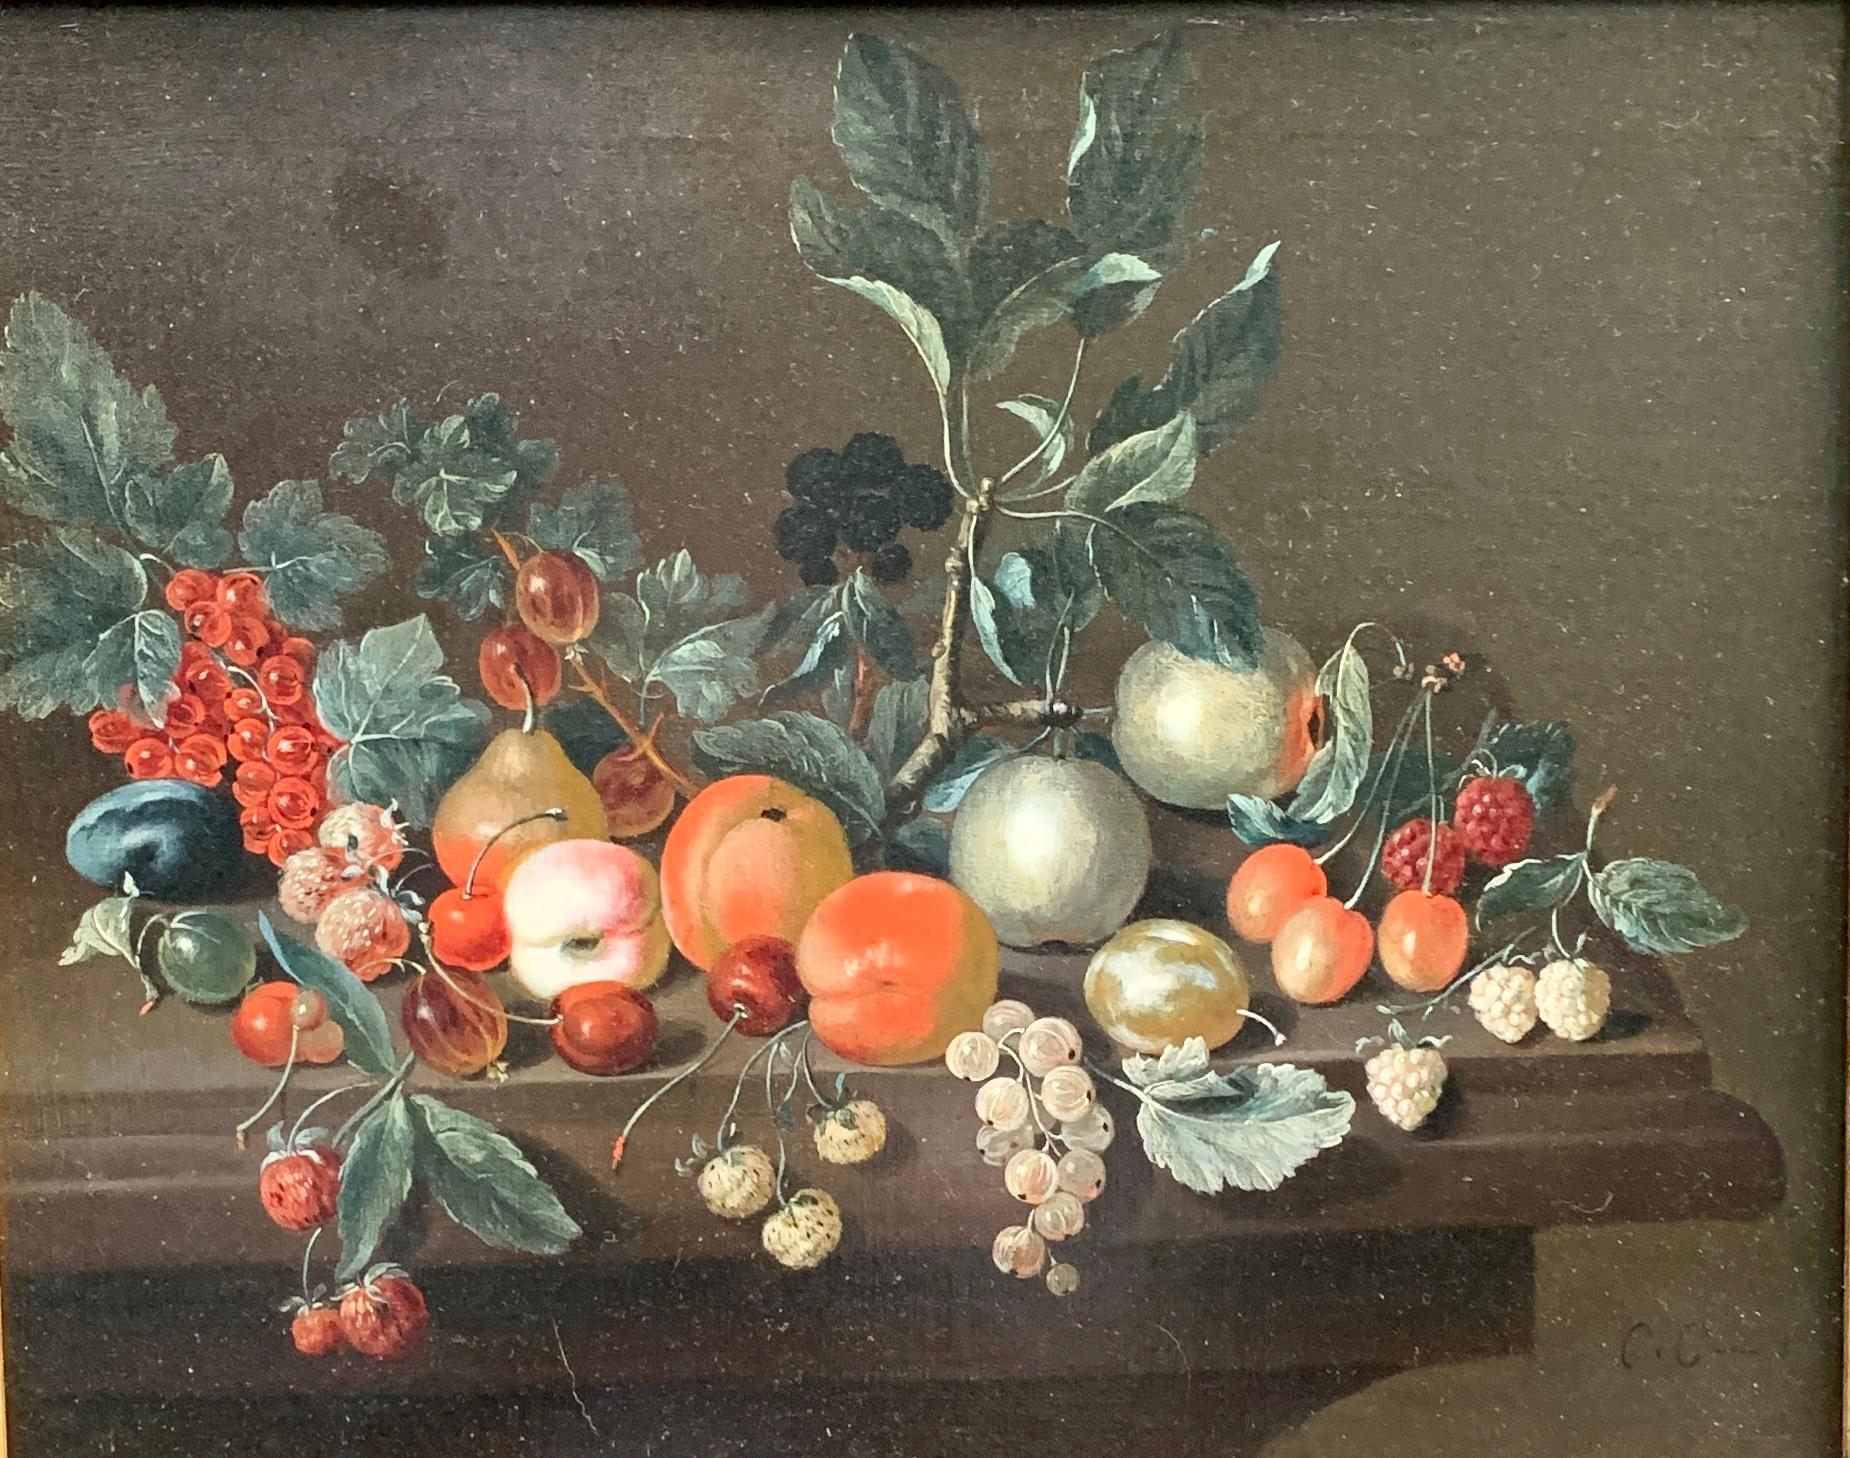 Dutch old master still life of fruit, with plums, Cherries, Raspberries etc - Painting by 18th Century Dutch School, monogrammed C.C